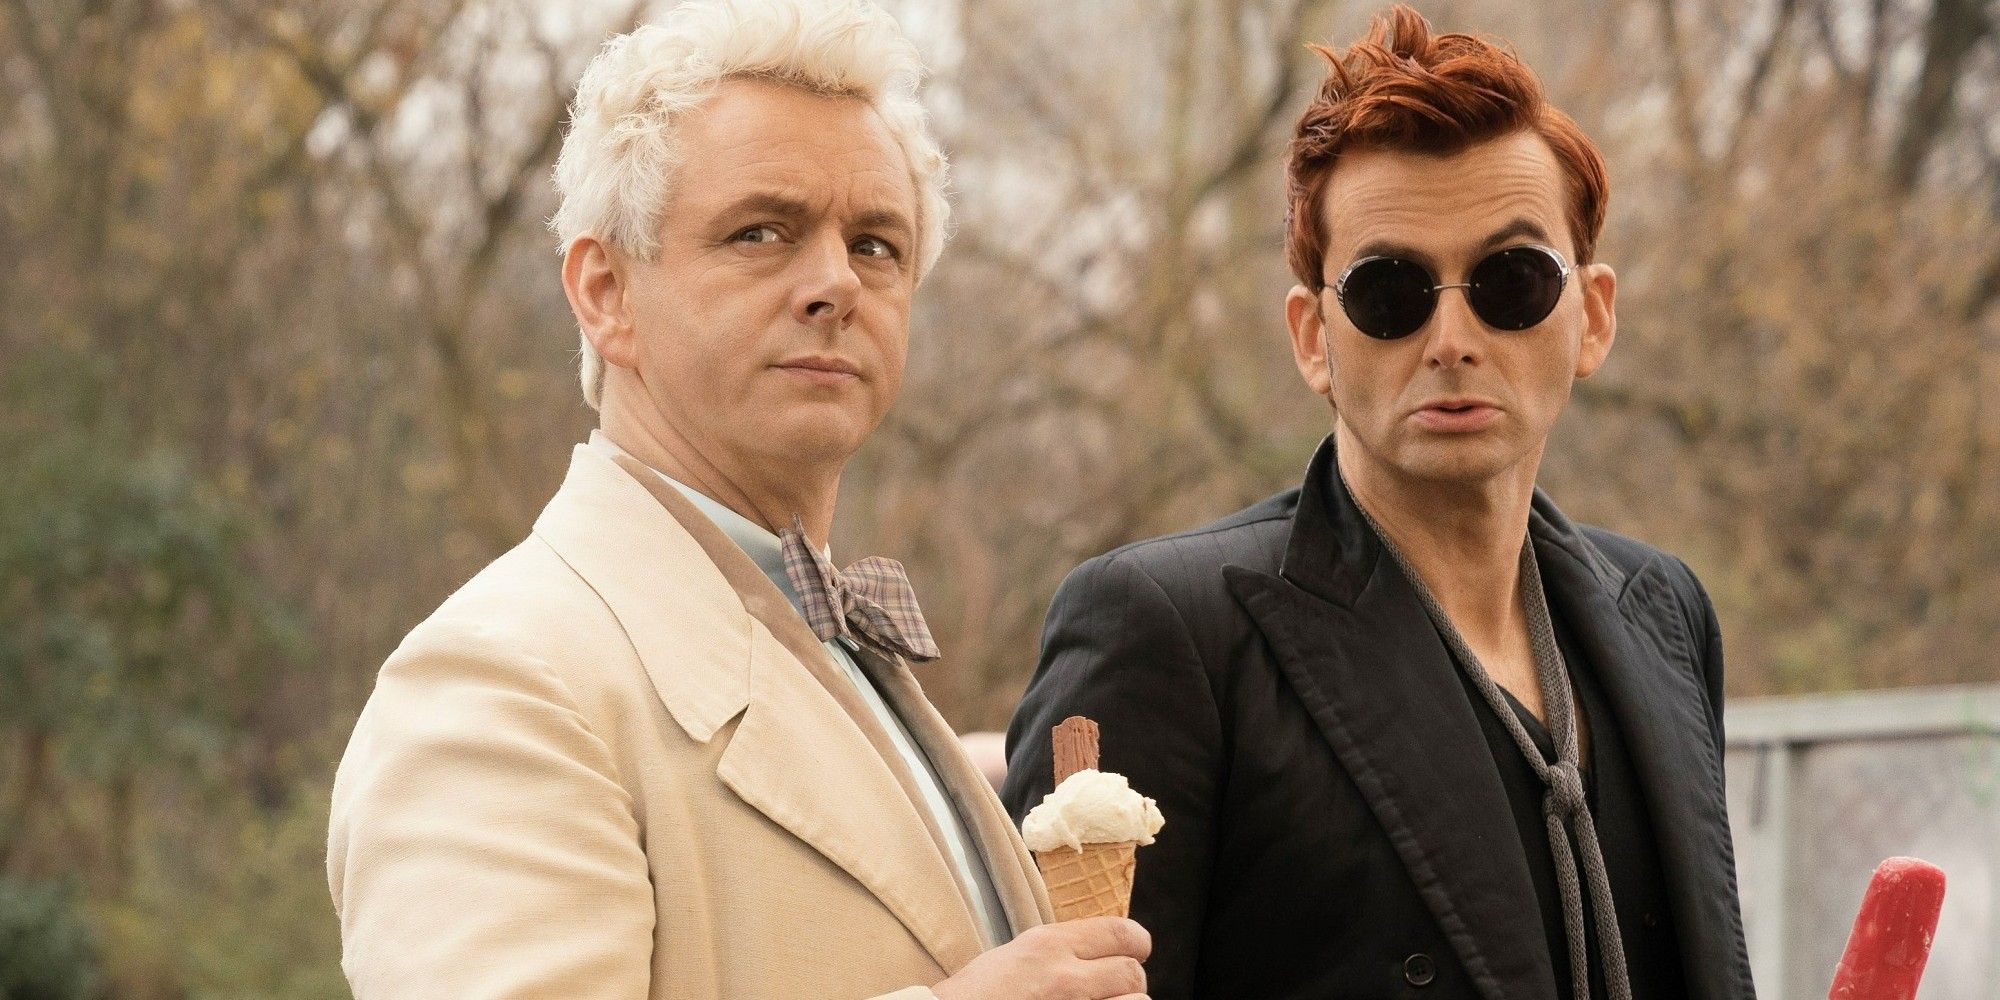 Michael Sheen and David Tennant as the angel and demon in Good Omens